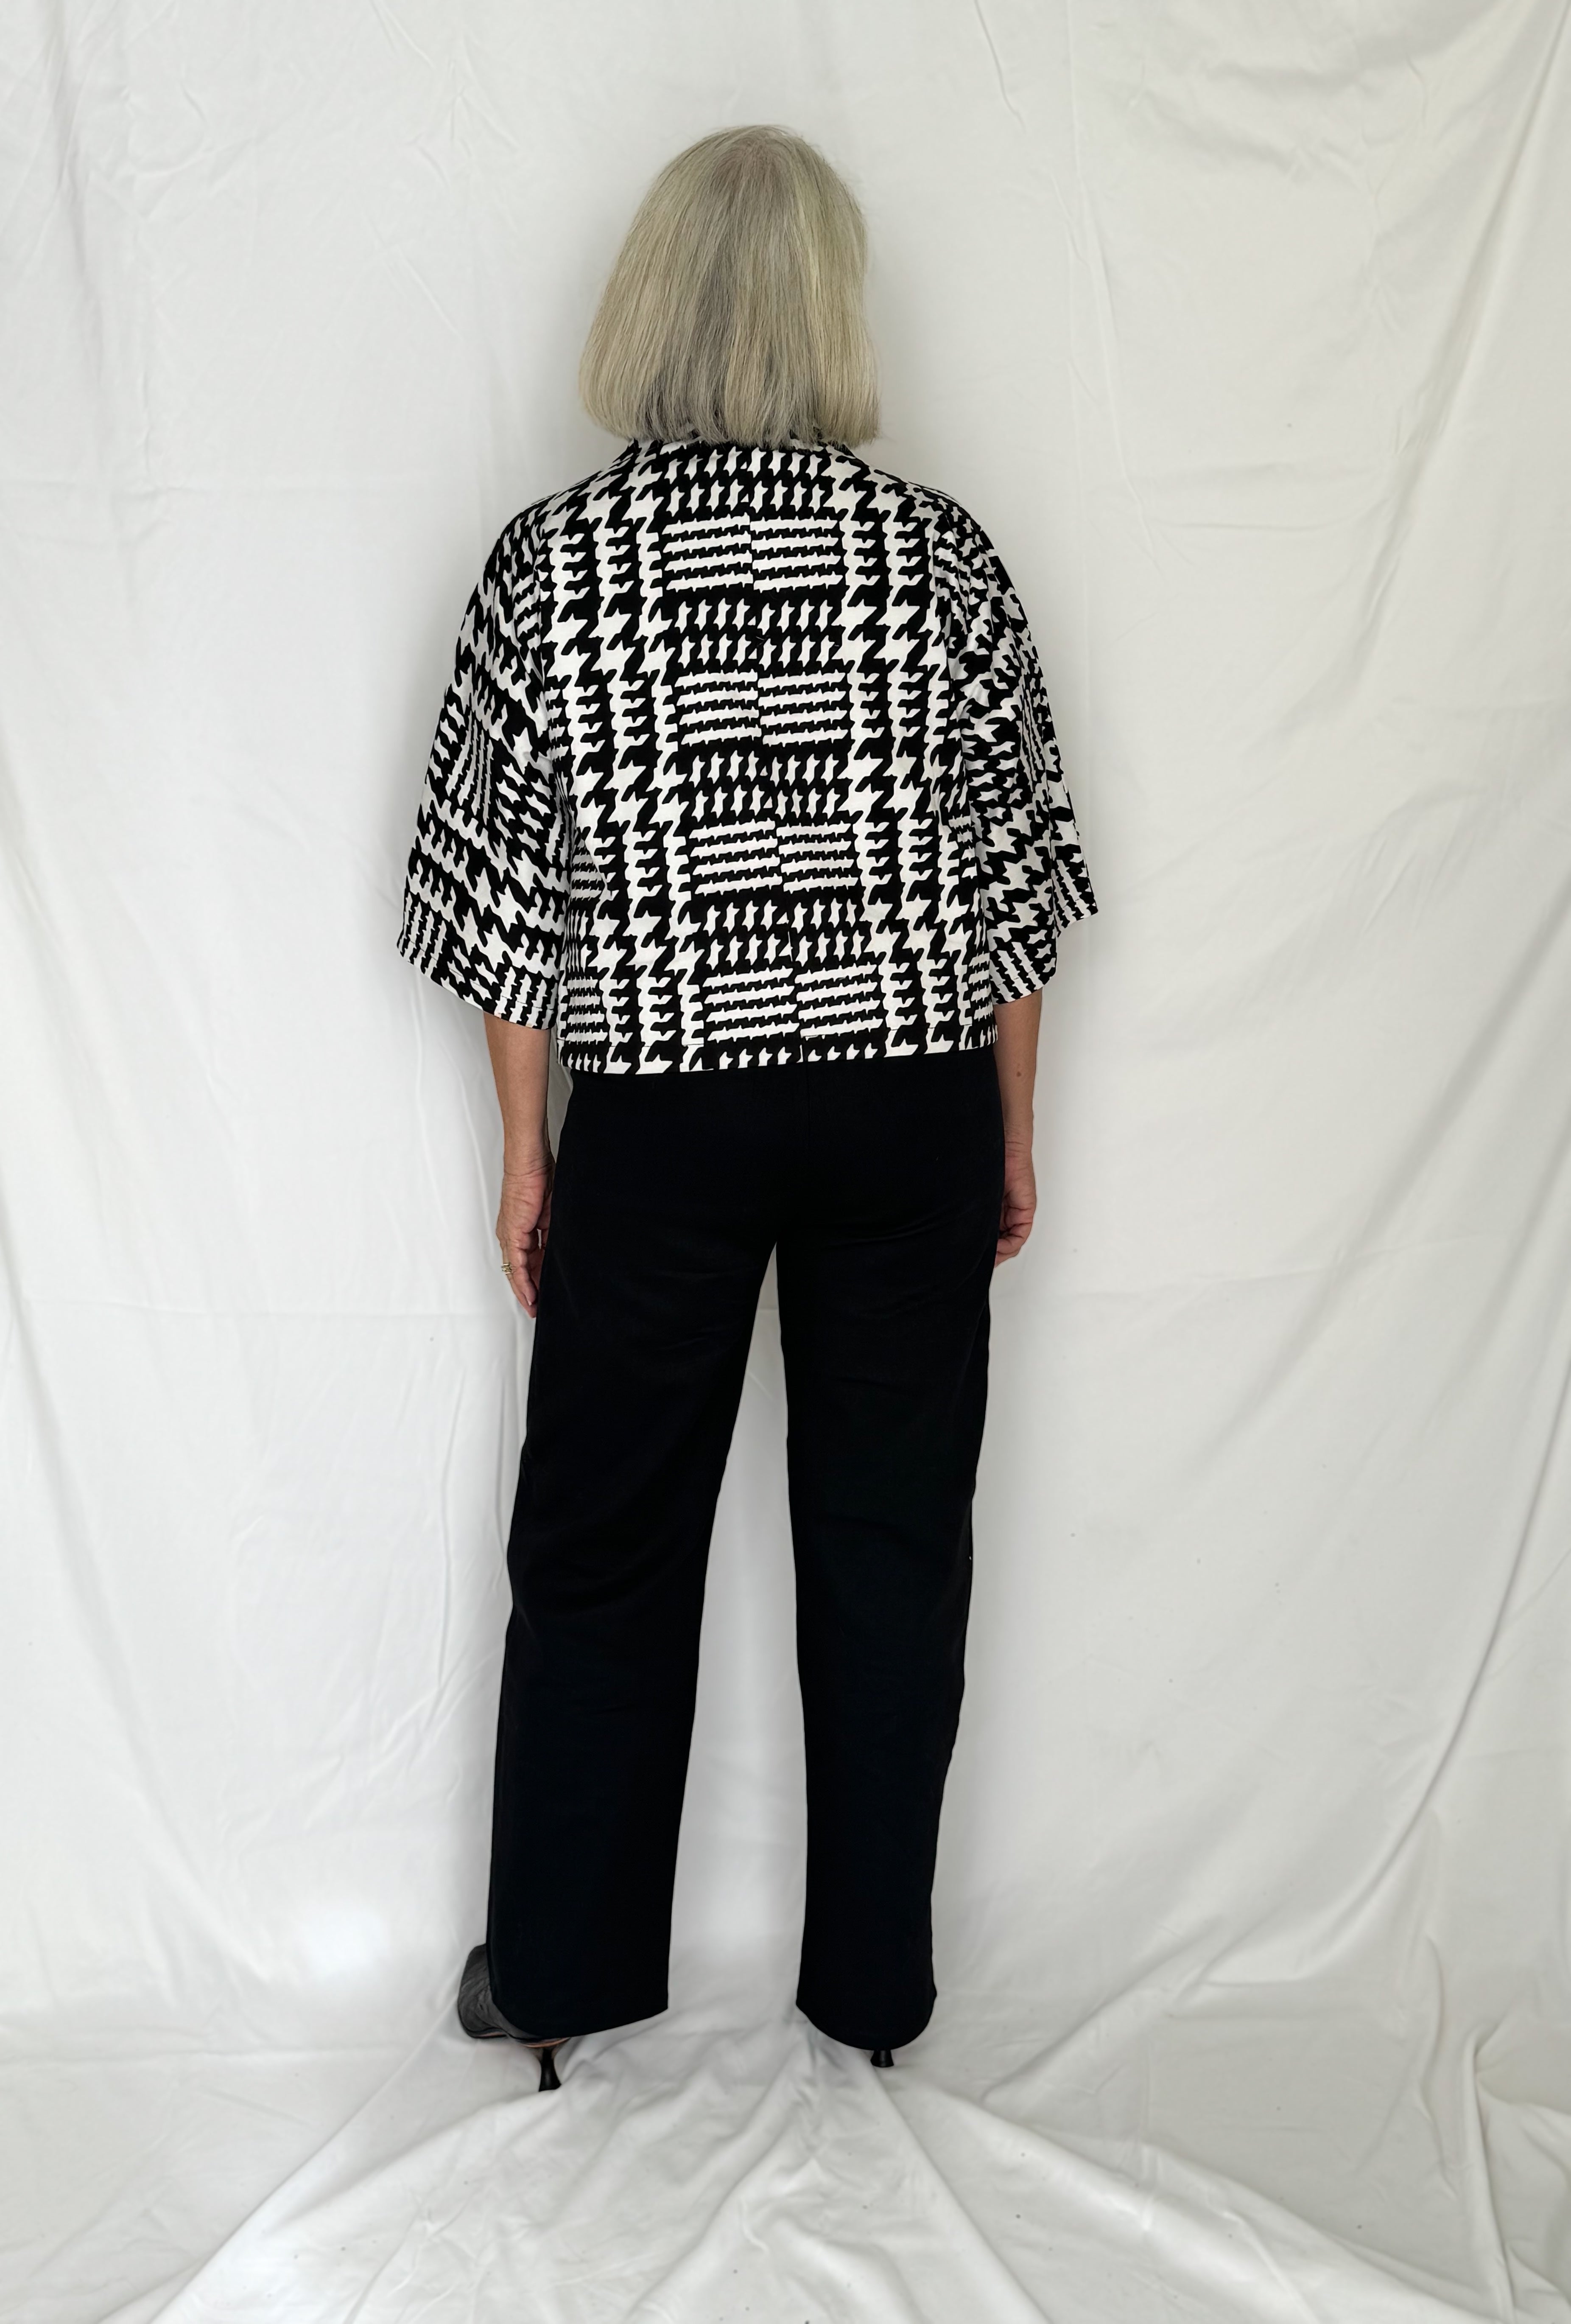 Black and White Houndstooth Jacket